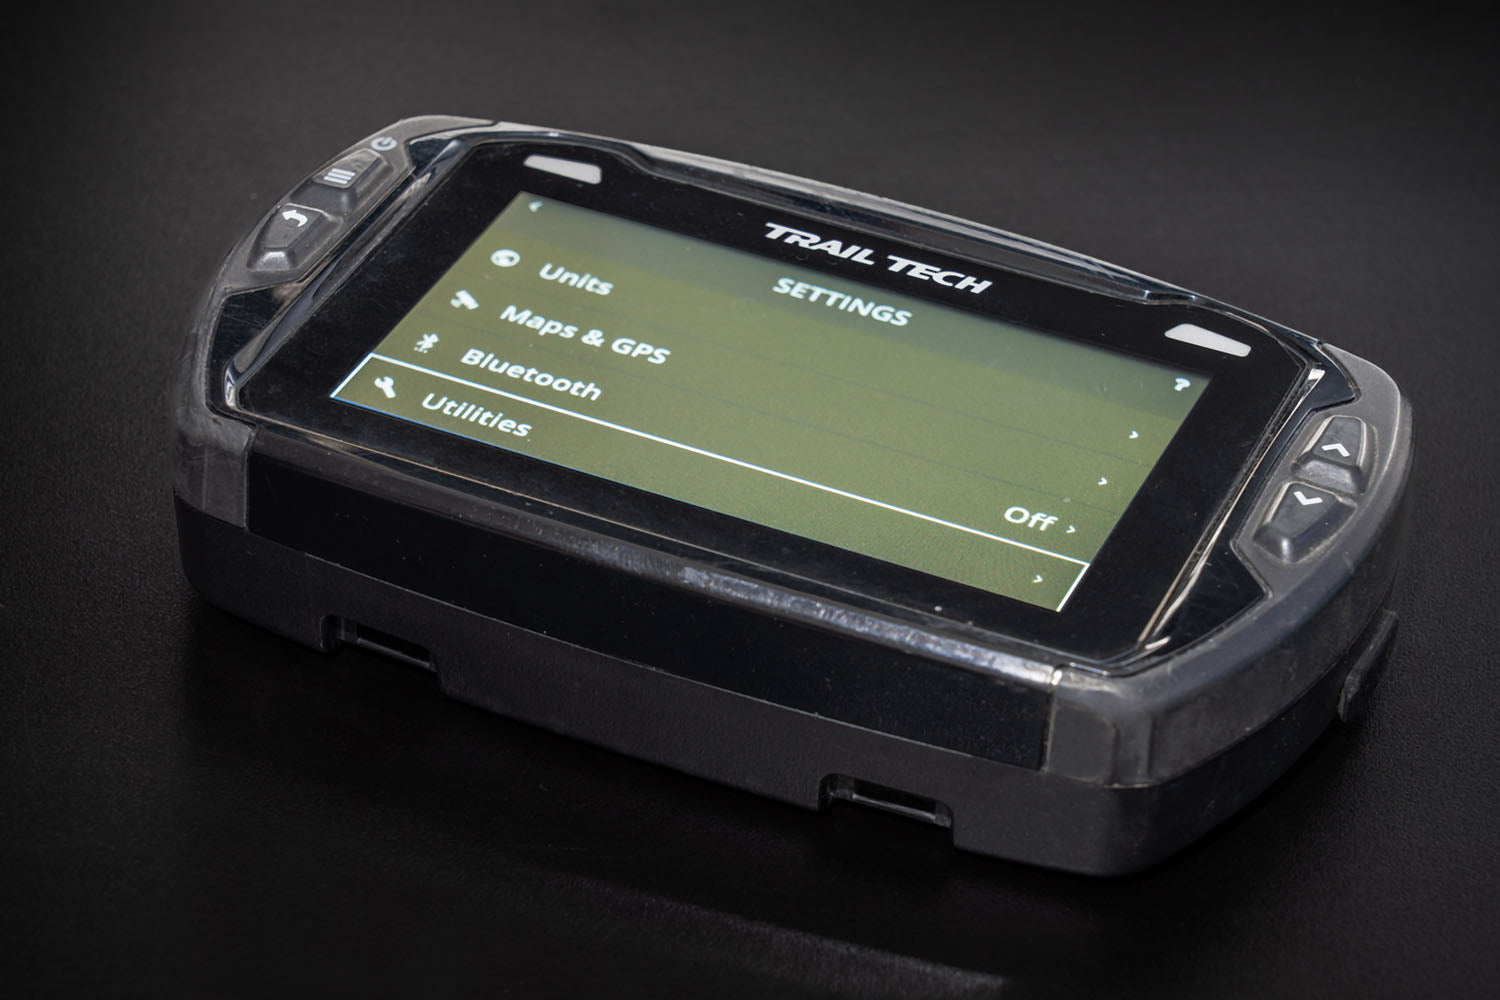 Trail Tech: Precision Speedometers, GPS, Rugged Parts for